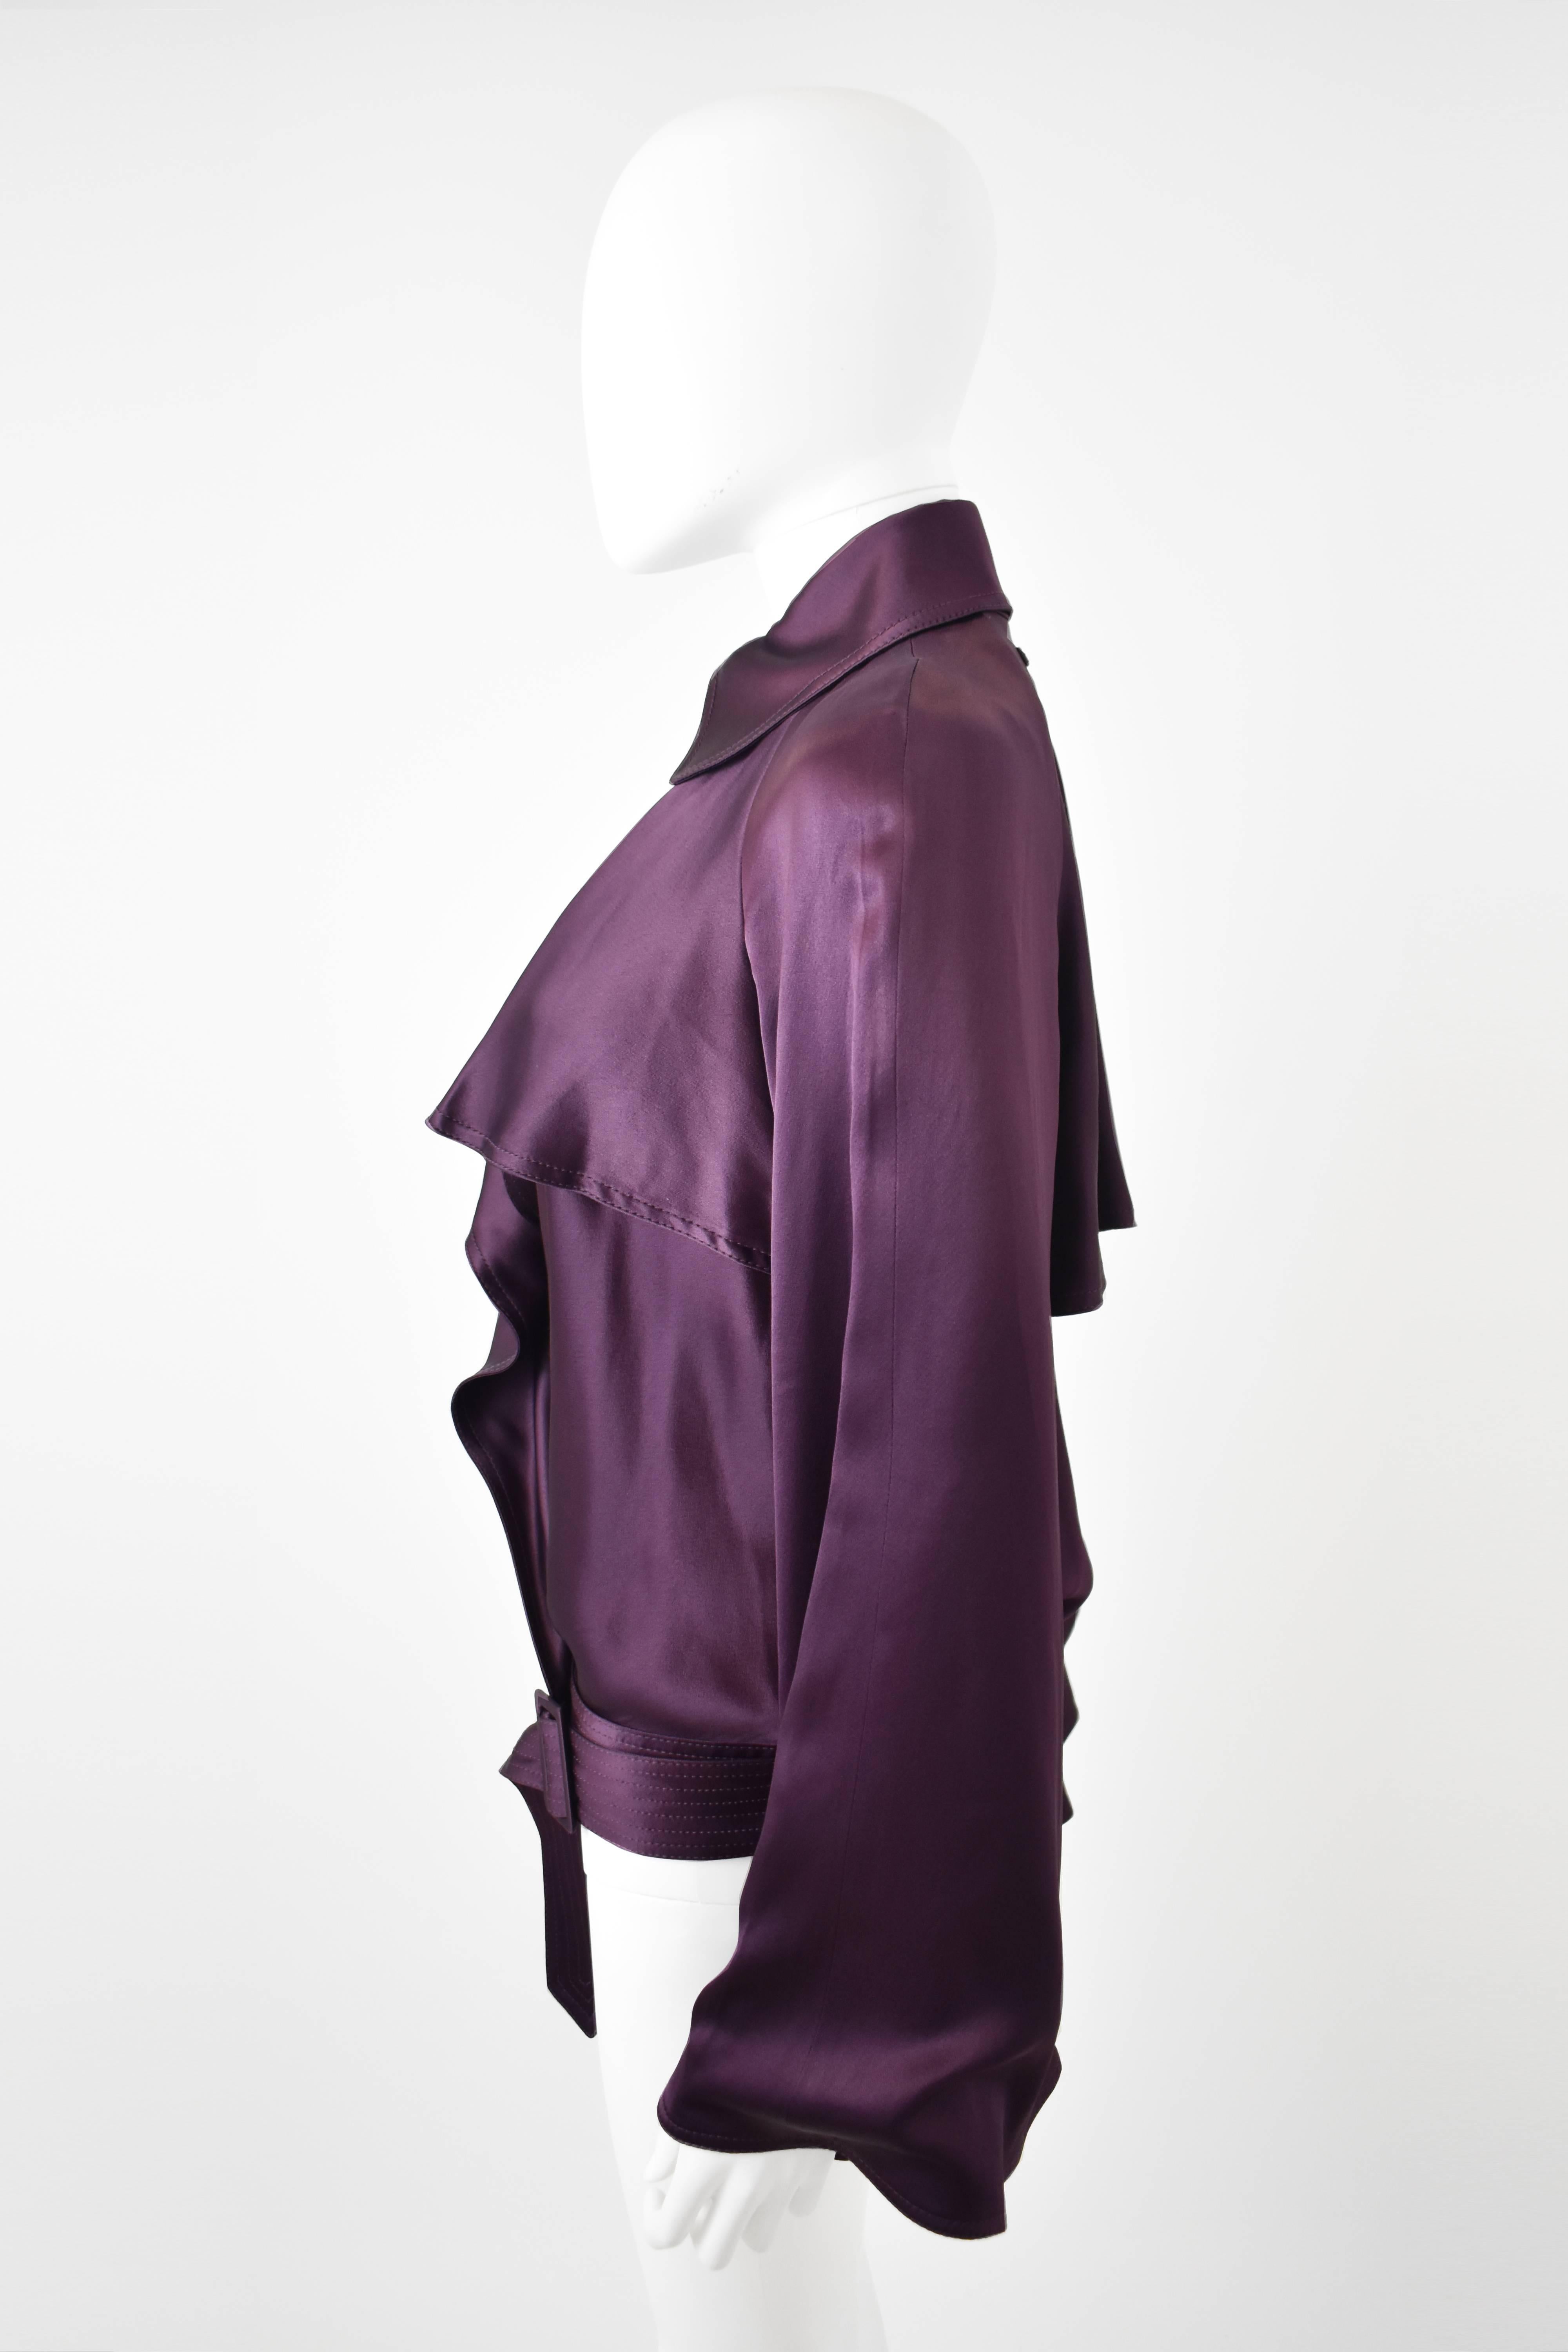 Black  Gaultier Purple Ruffle Wrap-around Top with Bell Sleeves and Collar